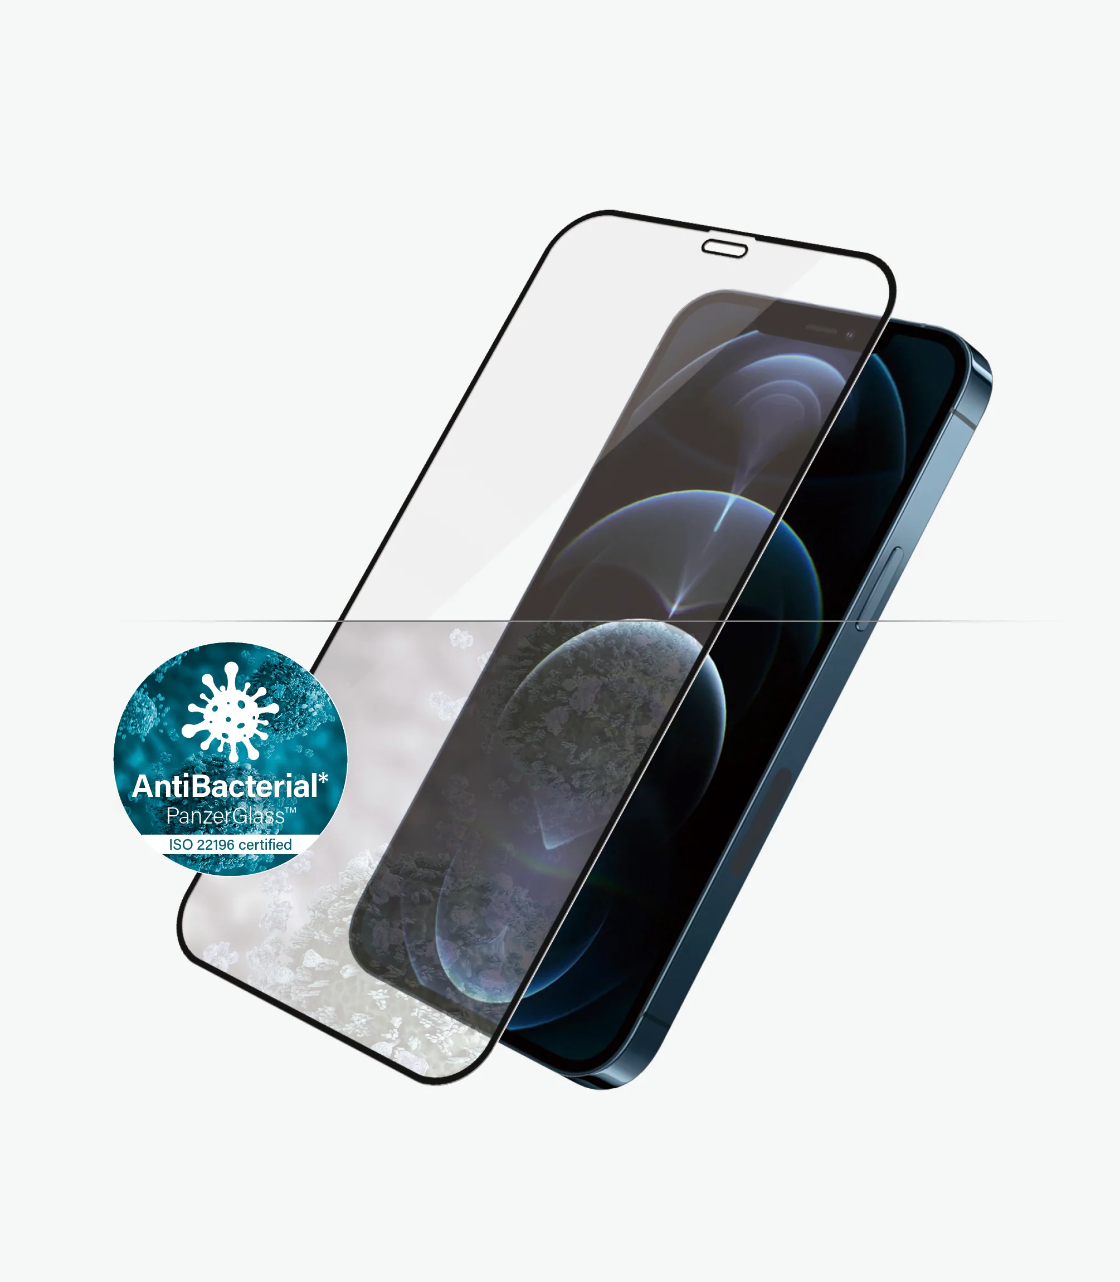 PanzerGlass Case Friendly 2.5D Tempered Glass for iPhone 12 Pro Max (Black)